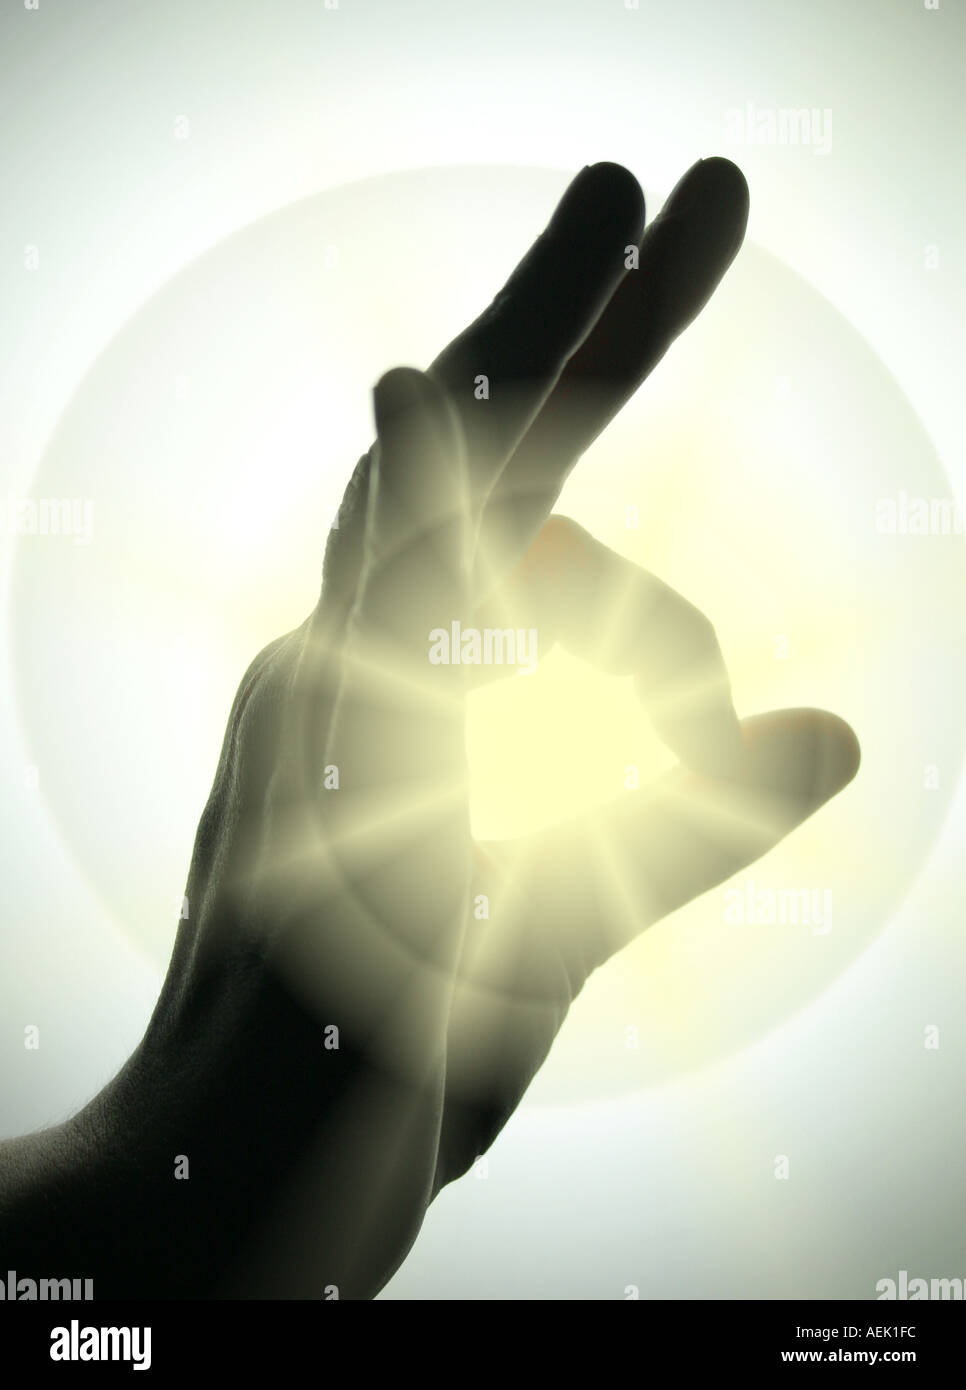 A OK symbol with sunlight streaming through Stock Photo